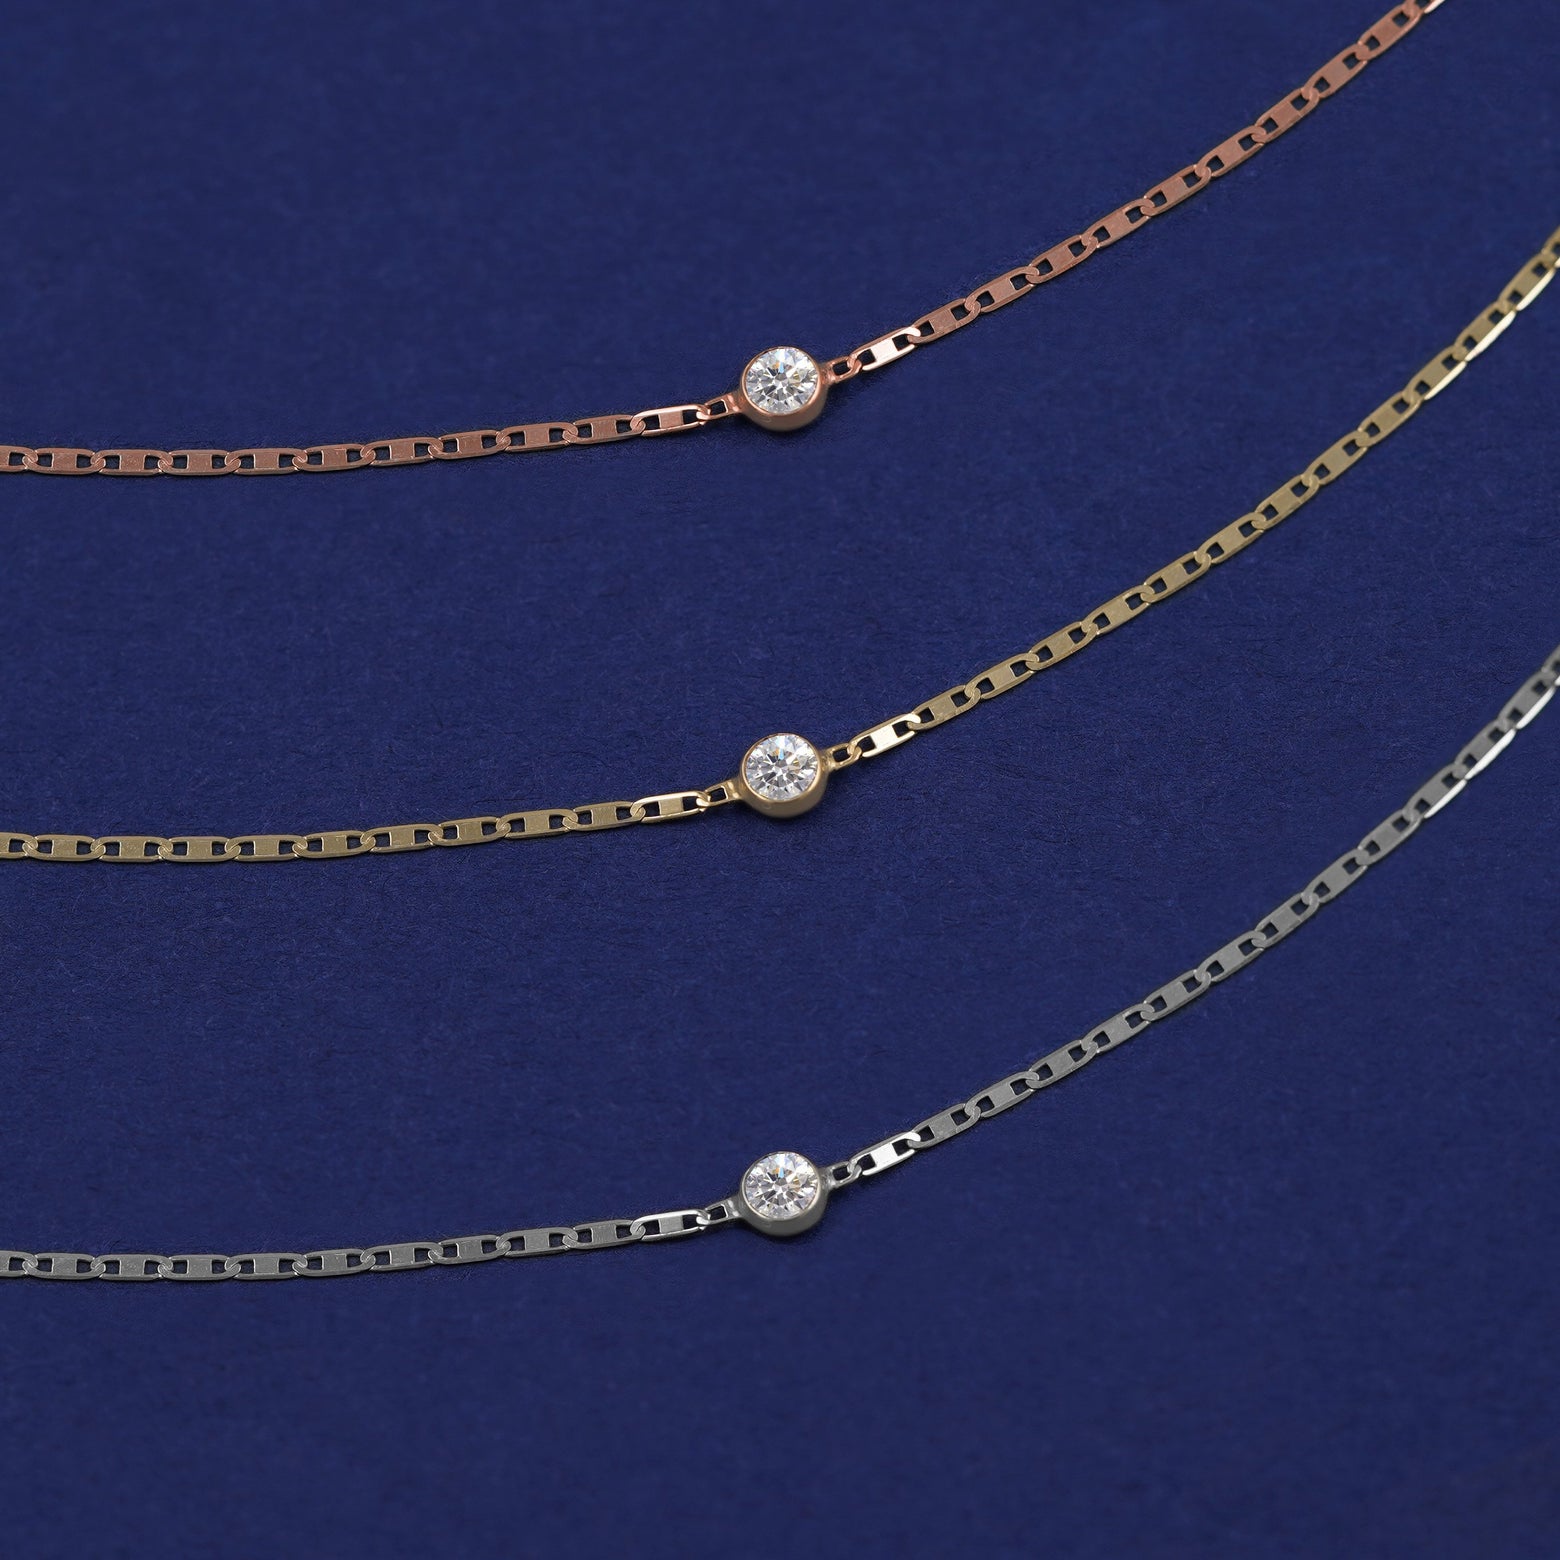 Three Moissanite Bracelets shown in options of rose, yellow, and white gold